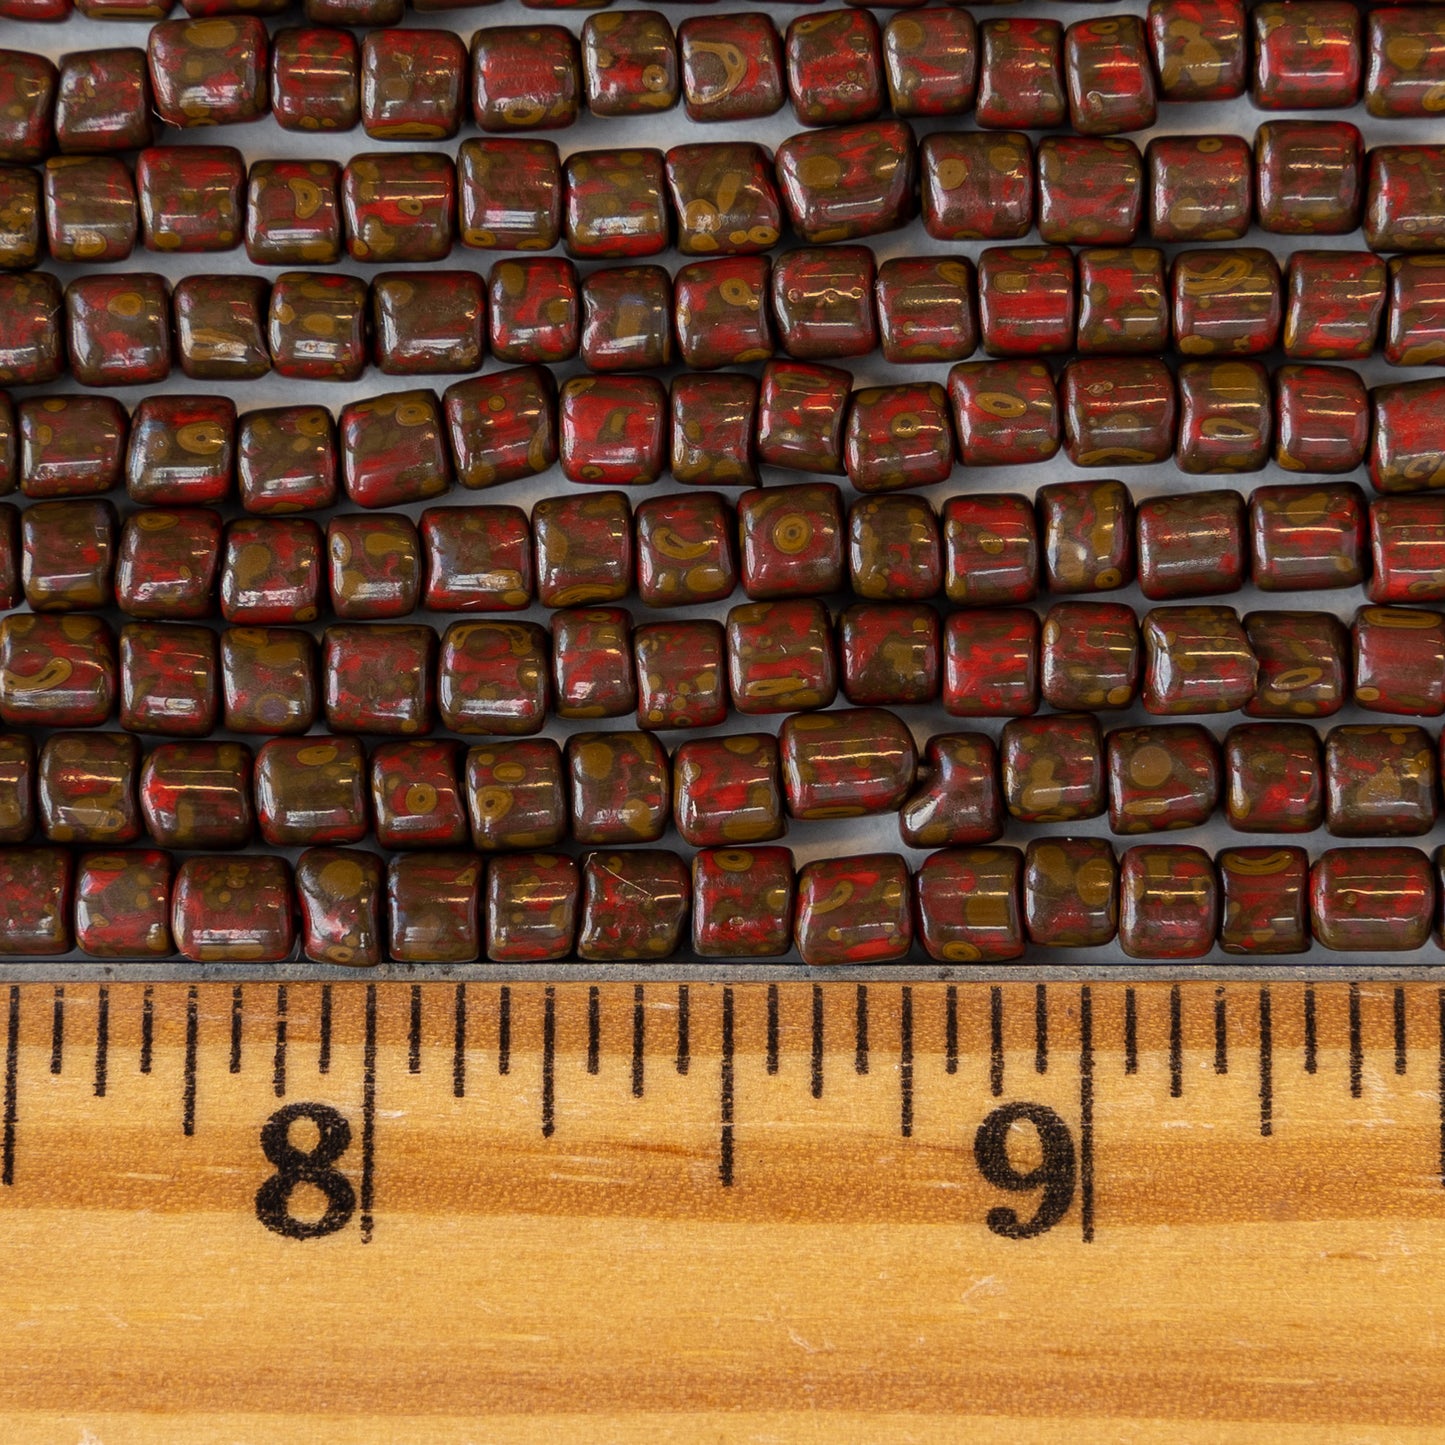 Load image into Gallery viewer, 4x4mm Picasso Tube Beads - Dark Red Picasso - 20 inches
